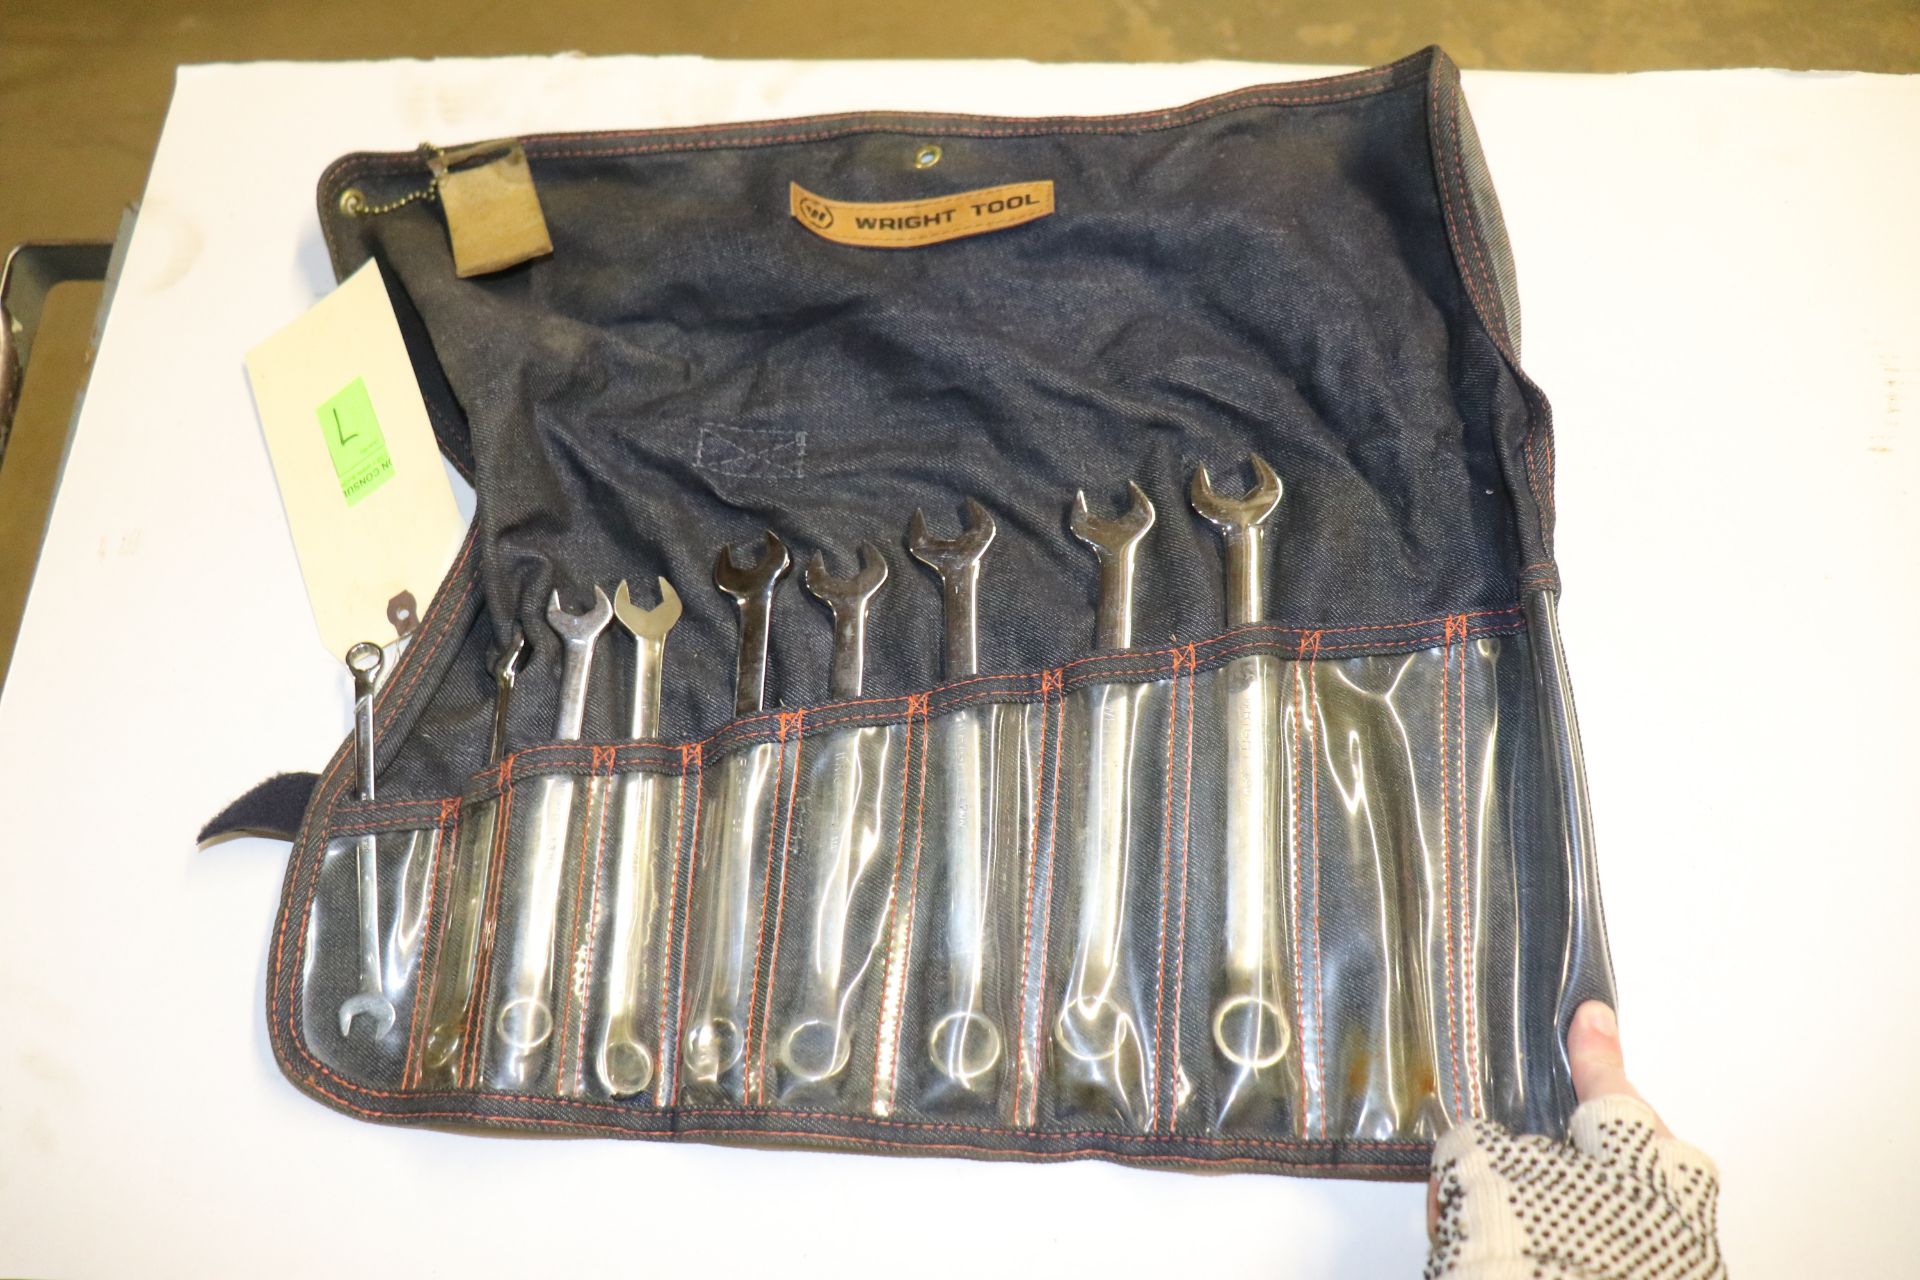 Set of Wright metric wrenches in soft case